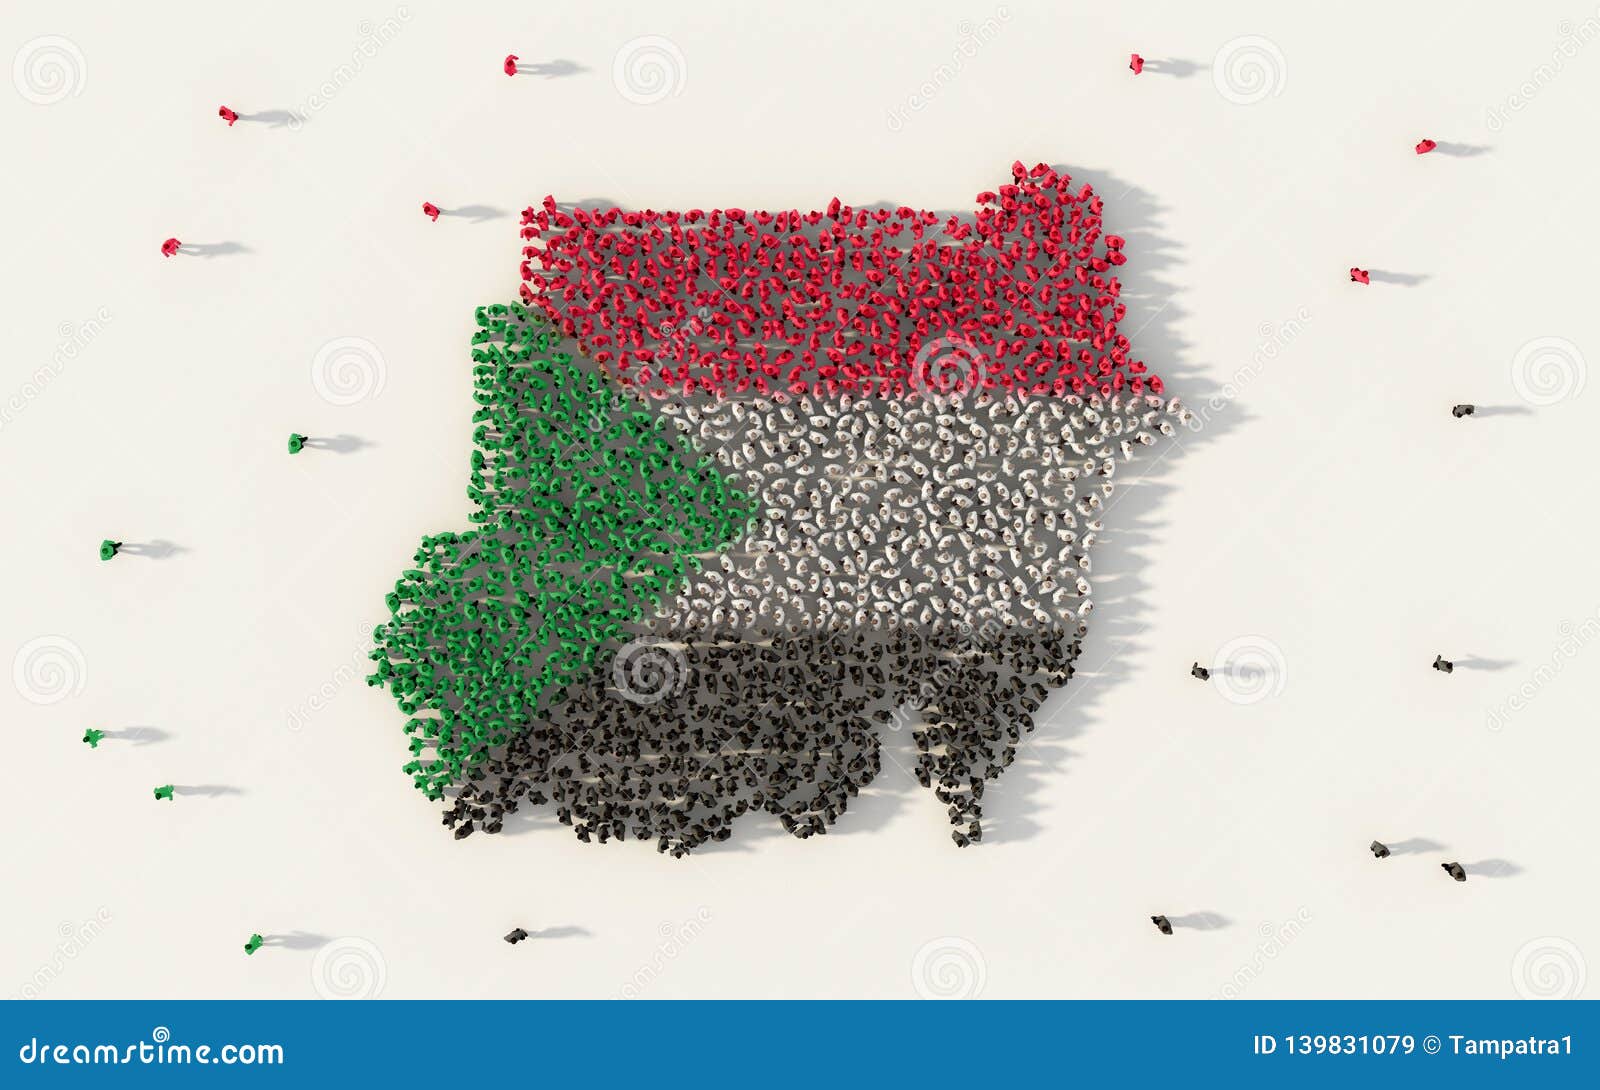 large group of people forming sudan map and national flag in social media and community concept on white background. 3d sign